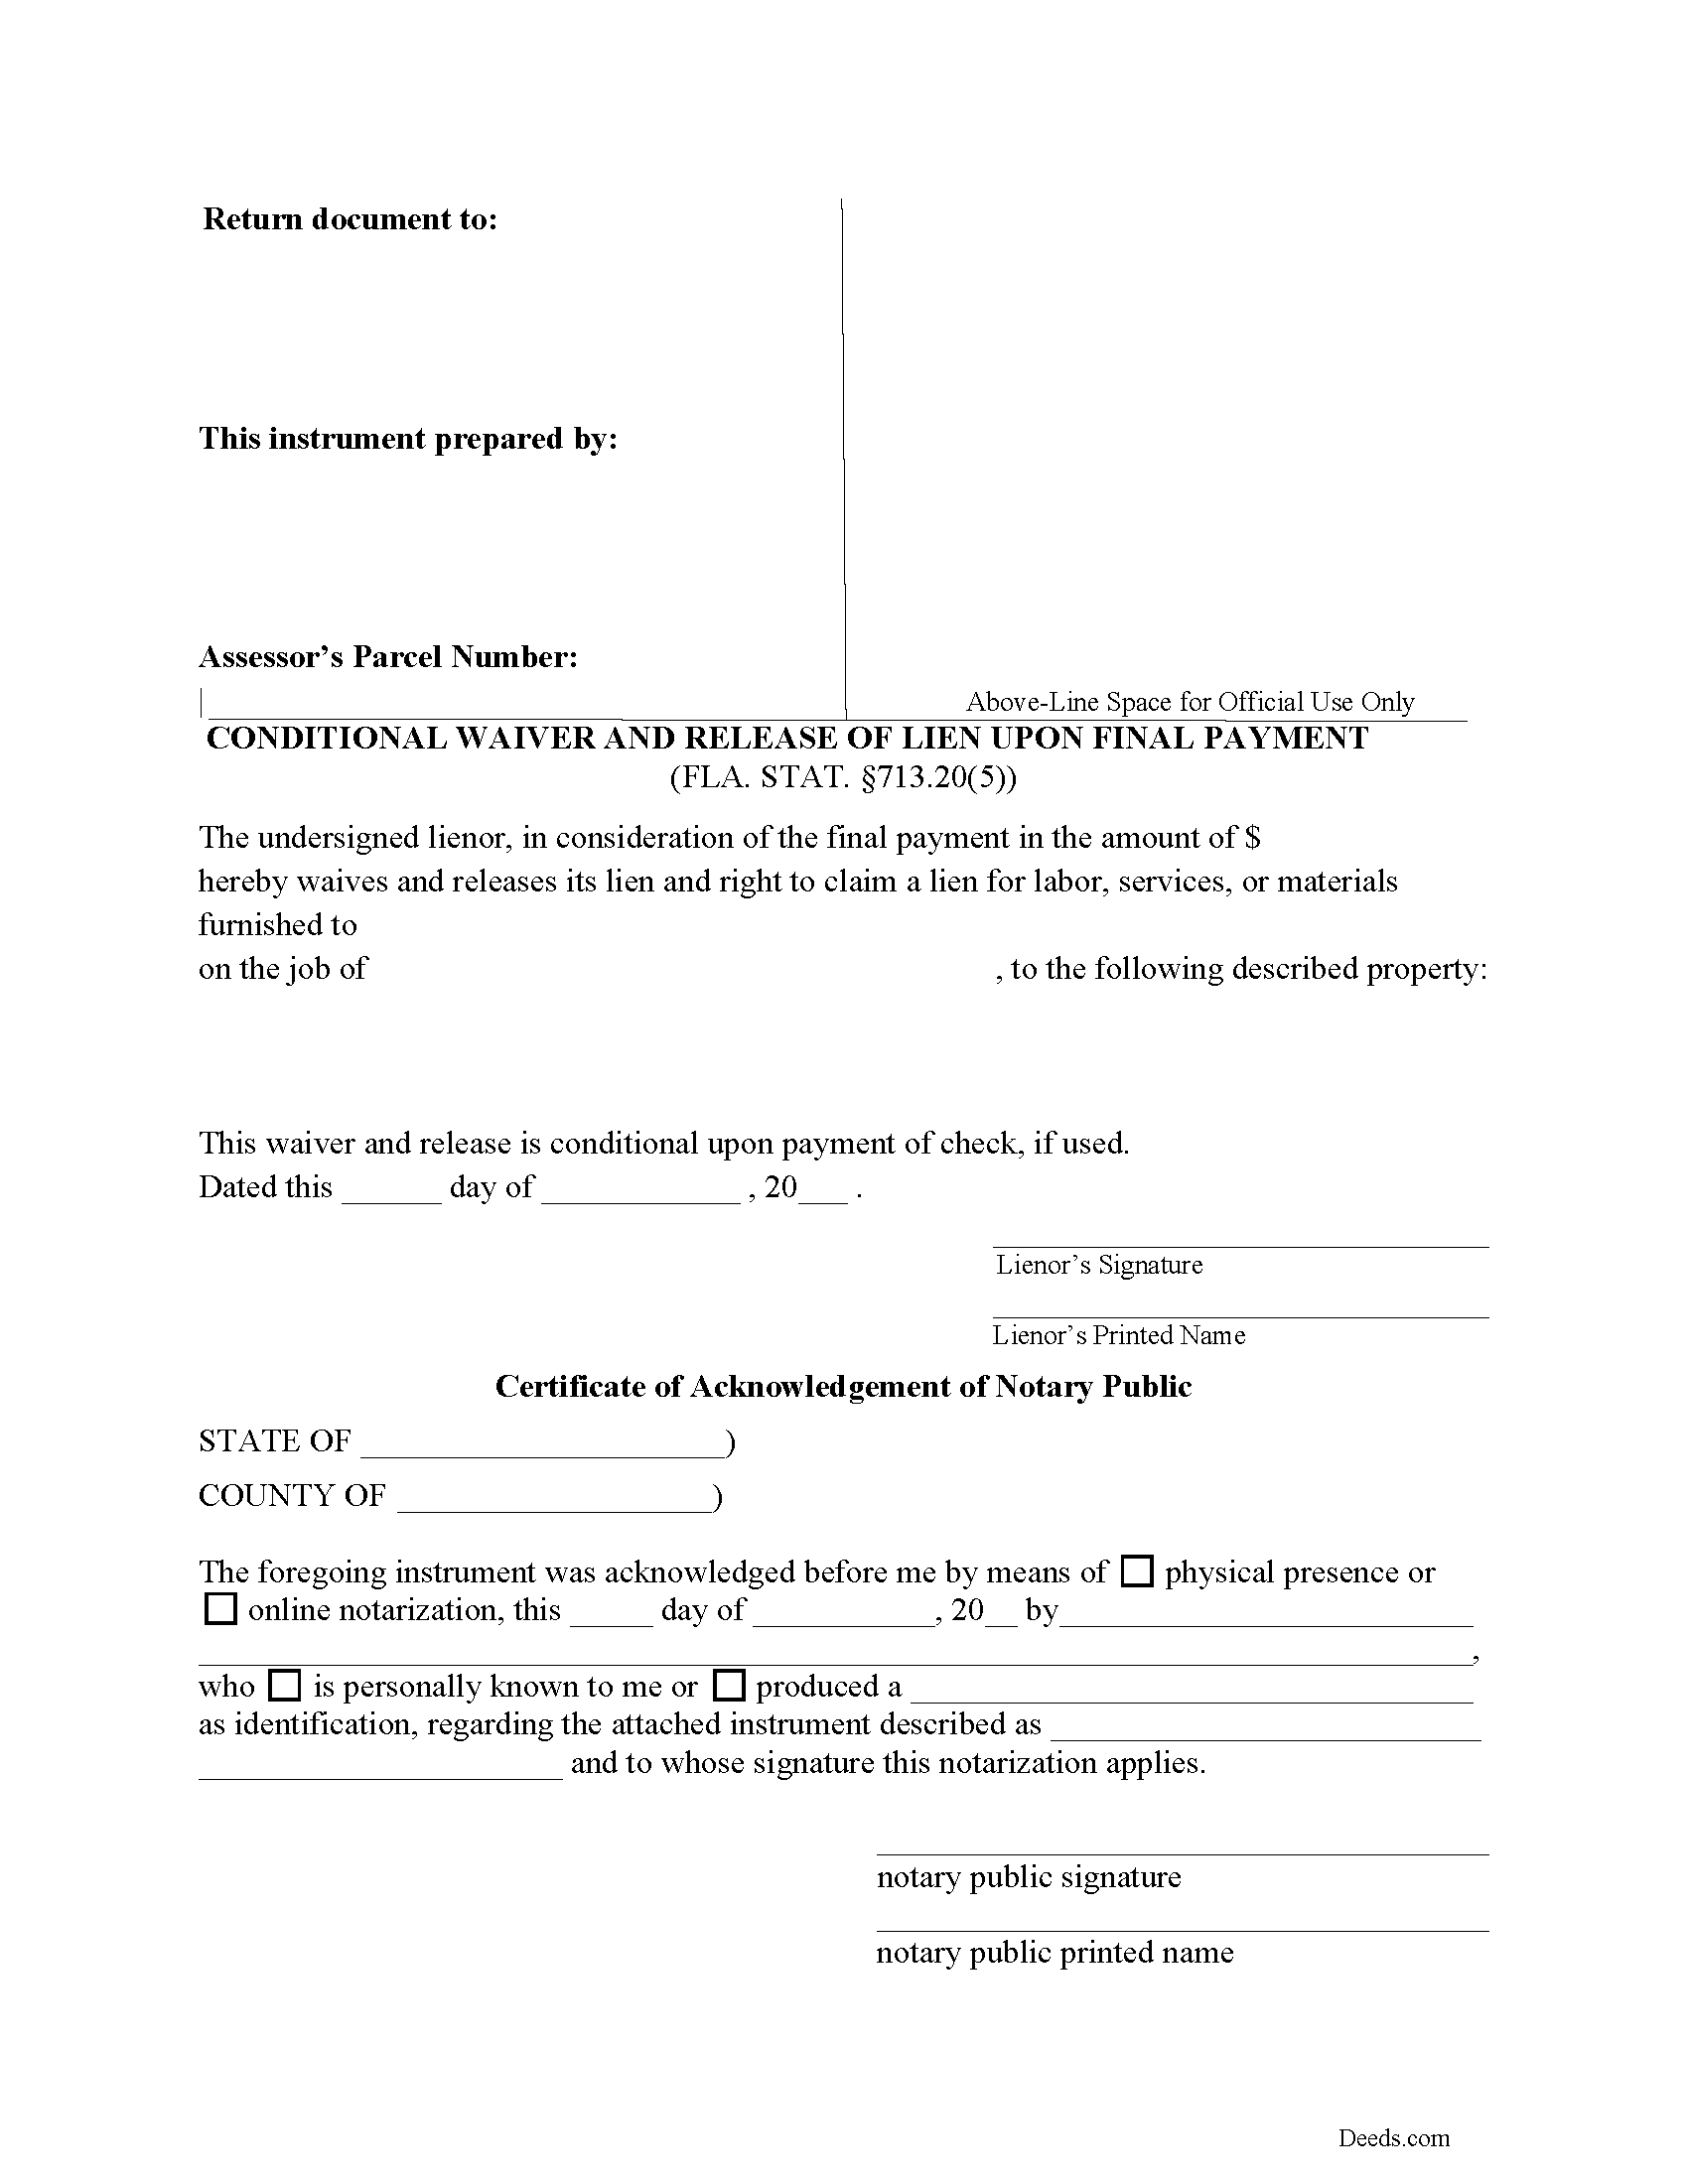 Florida Conditional Waiver and Release of Lien upon Final Payment Image